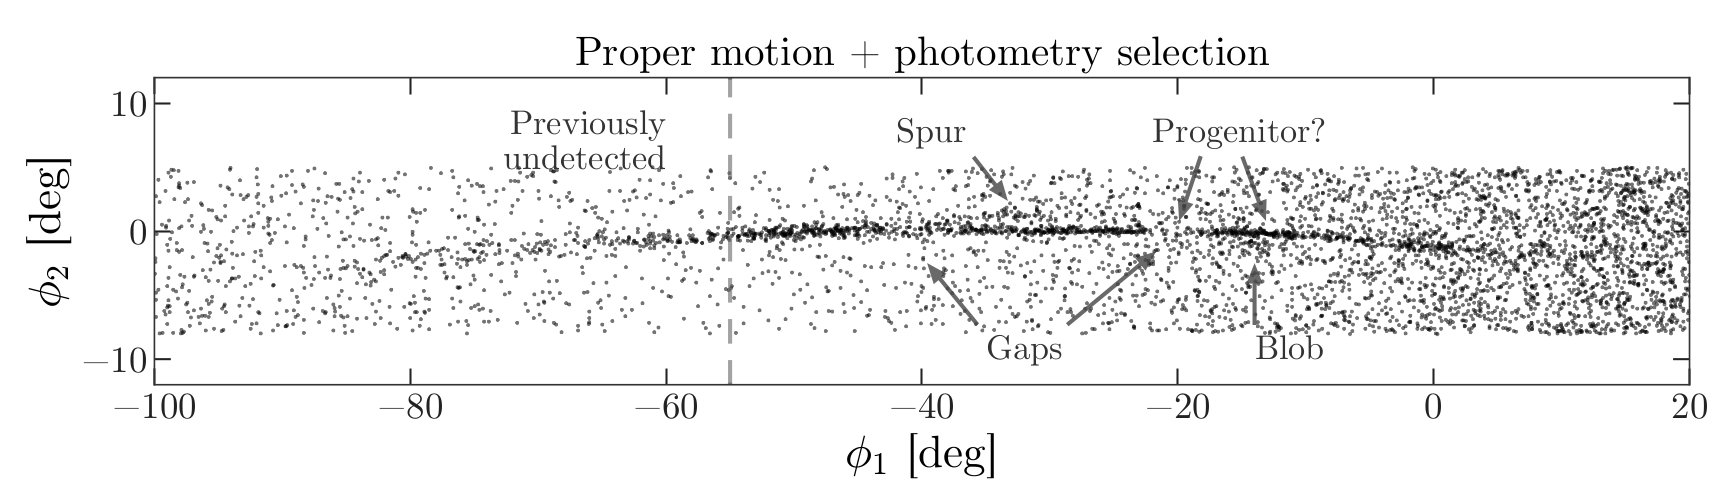 Figure from Price-Whelan and Bonaca paper showing phi1 vs phi2 in GD-1 after selecting on proper motion and photometry.